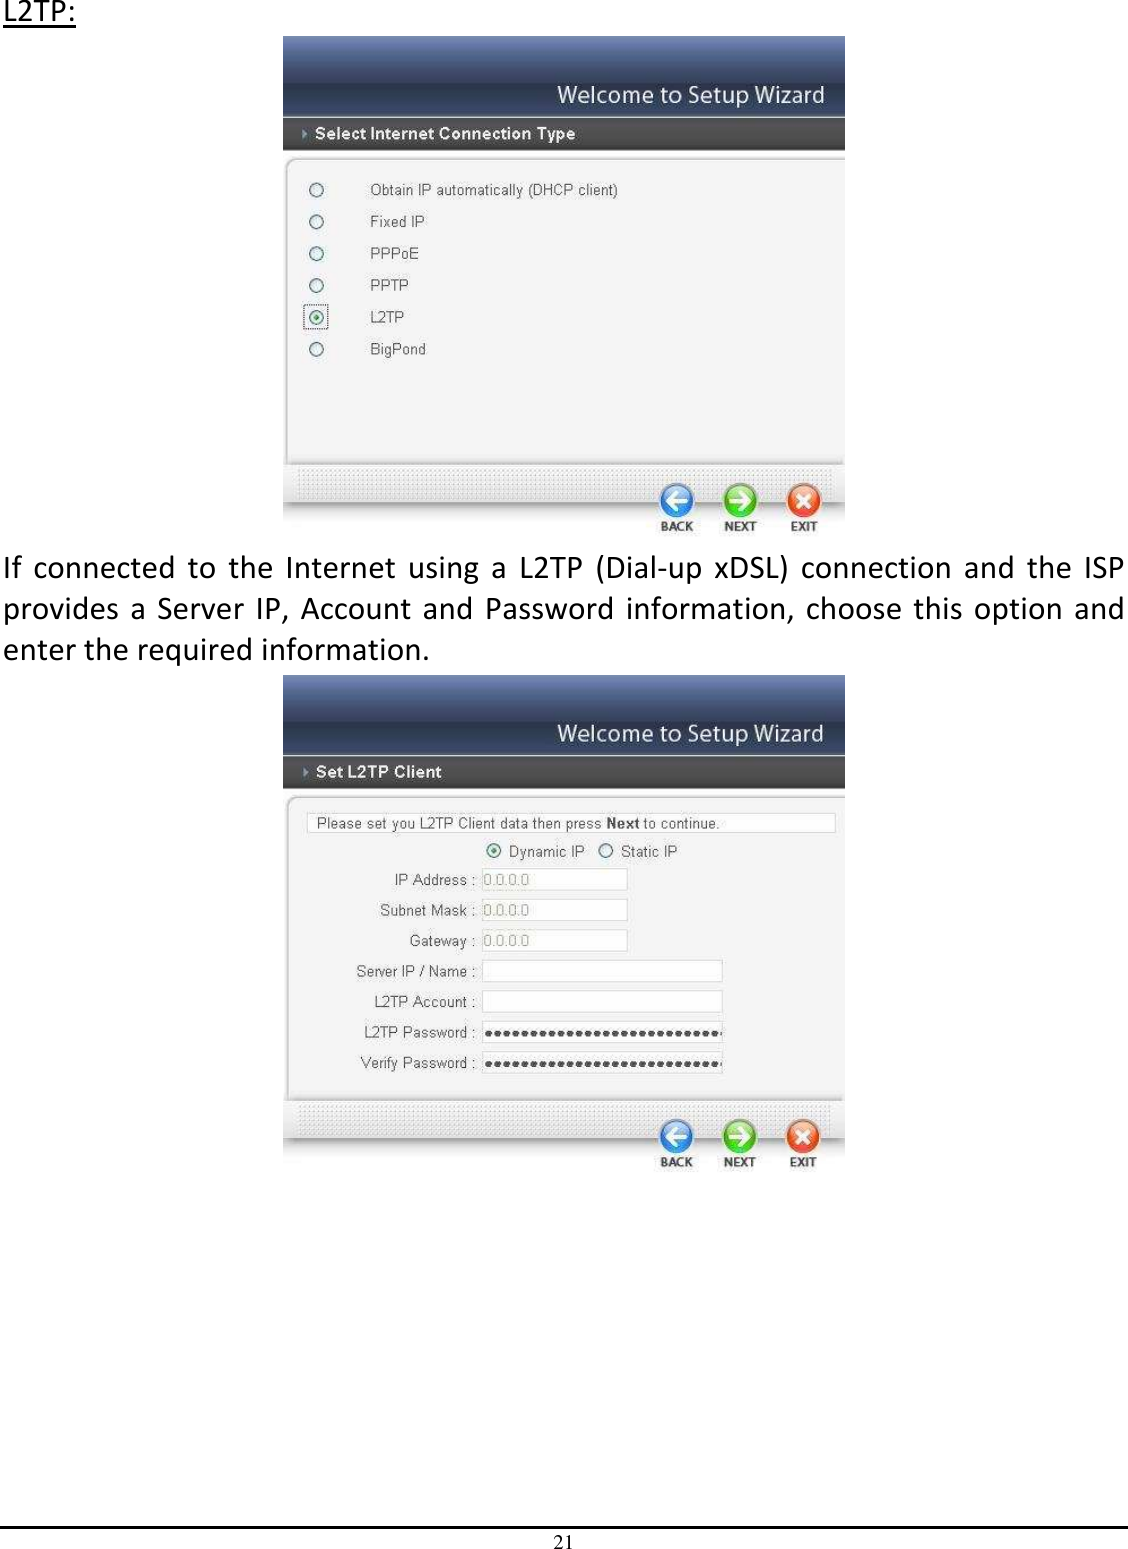 21 L2TP:  If  connected  to  the  Internet  using  a  L2TP  (Dial-up  xDSL)  connection  and  the  ISP provides  a Server  IP, Account and Password  information,  choose this option  and enter the required information.  